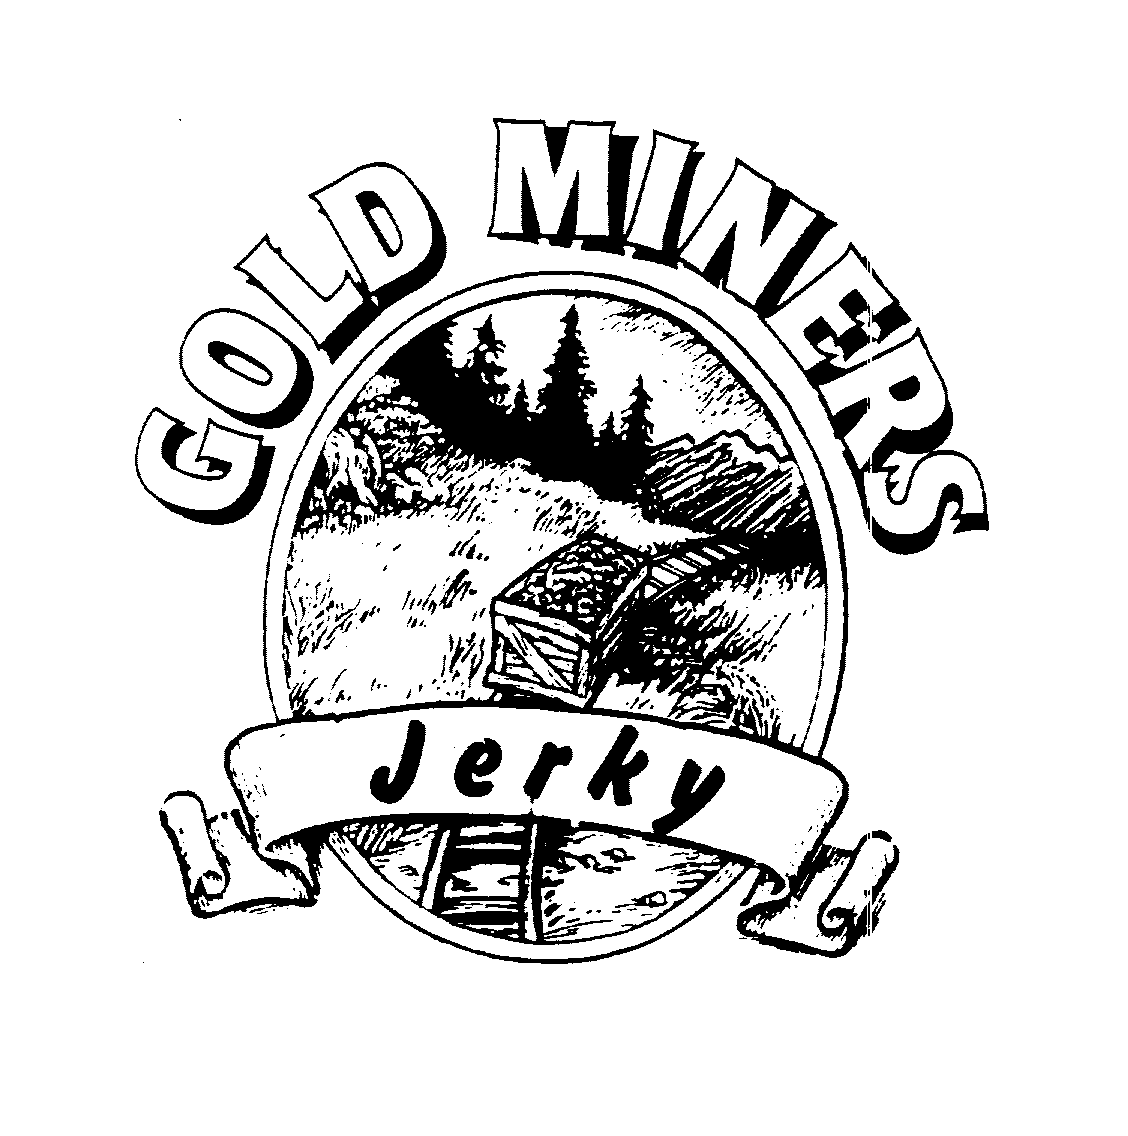  GOLD MINERS JERKY